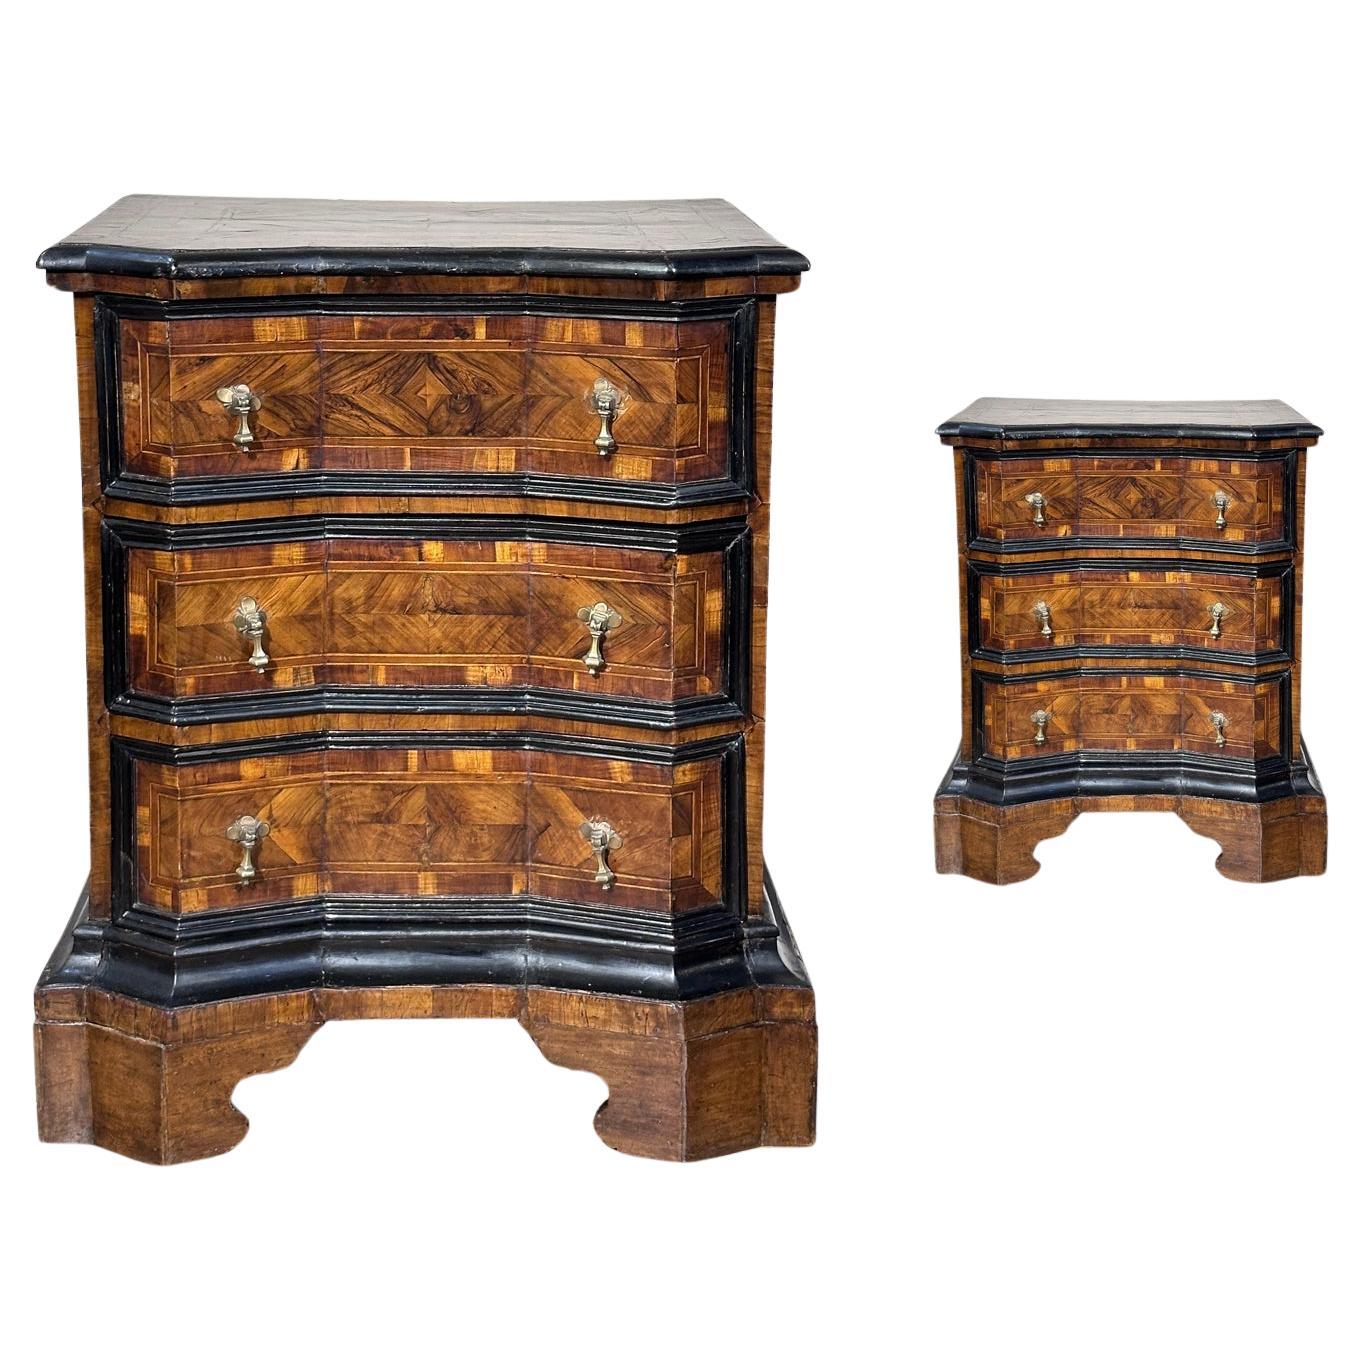 EARLY 18th CENTURY PAIR OF CHESTS LOUIS XIV 